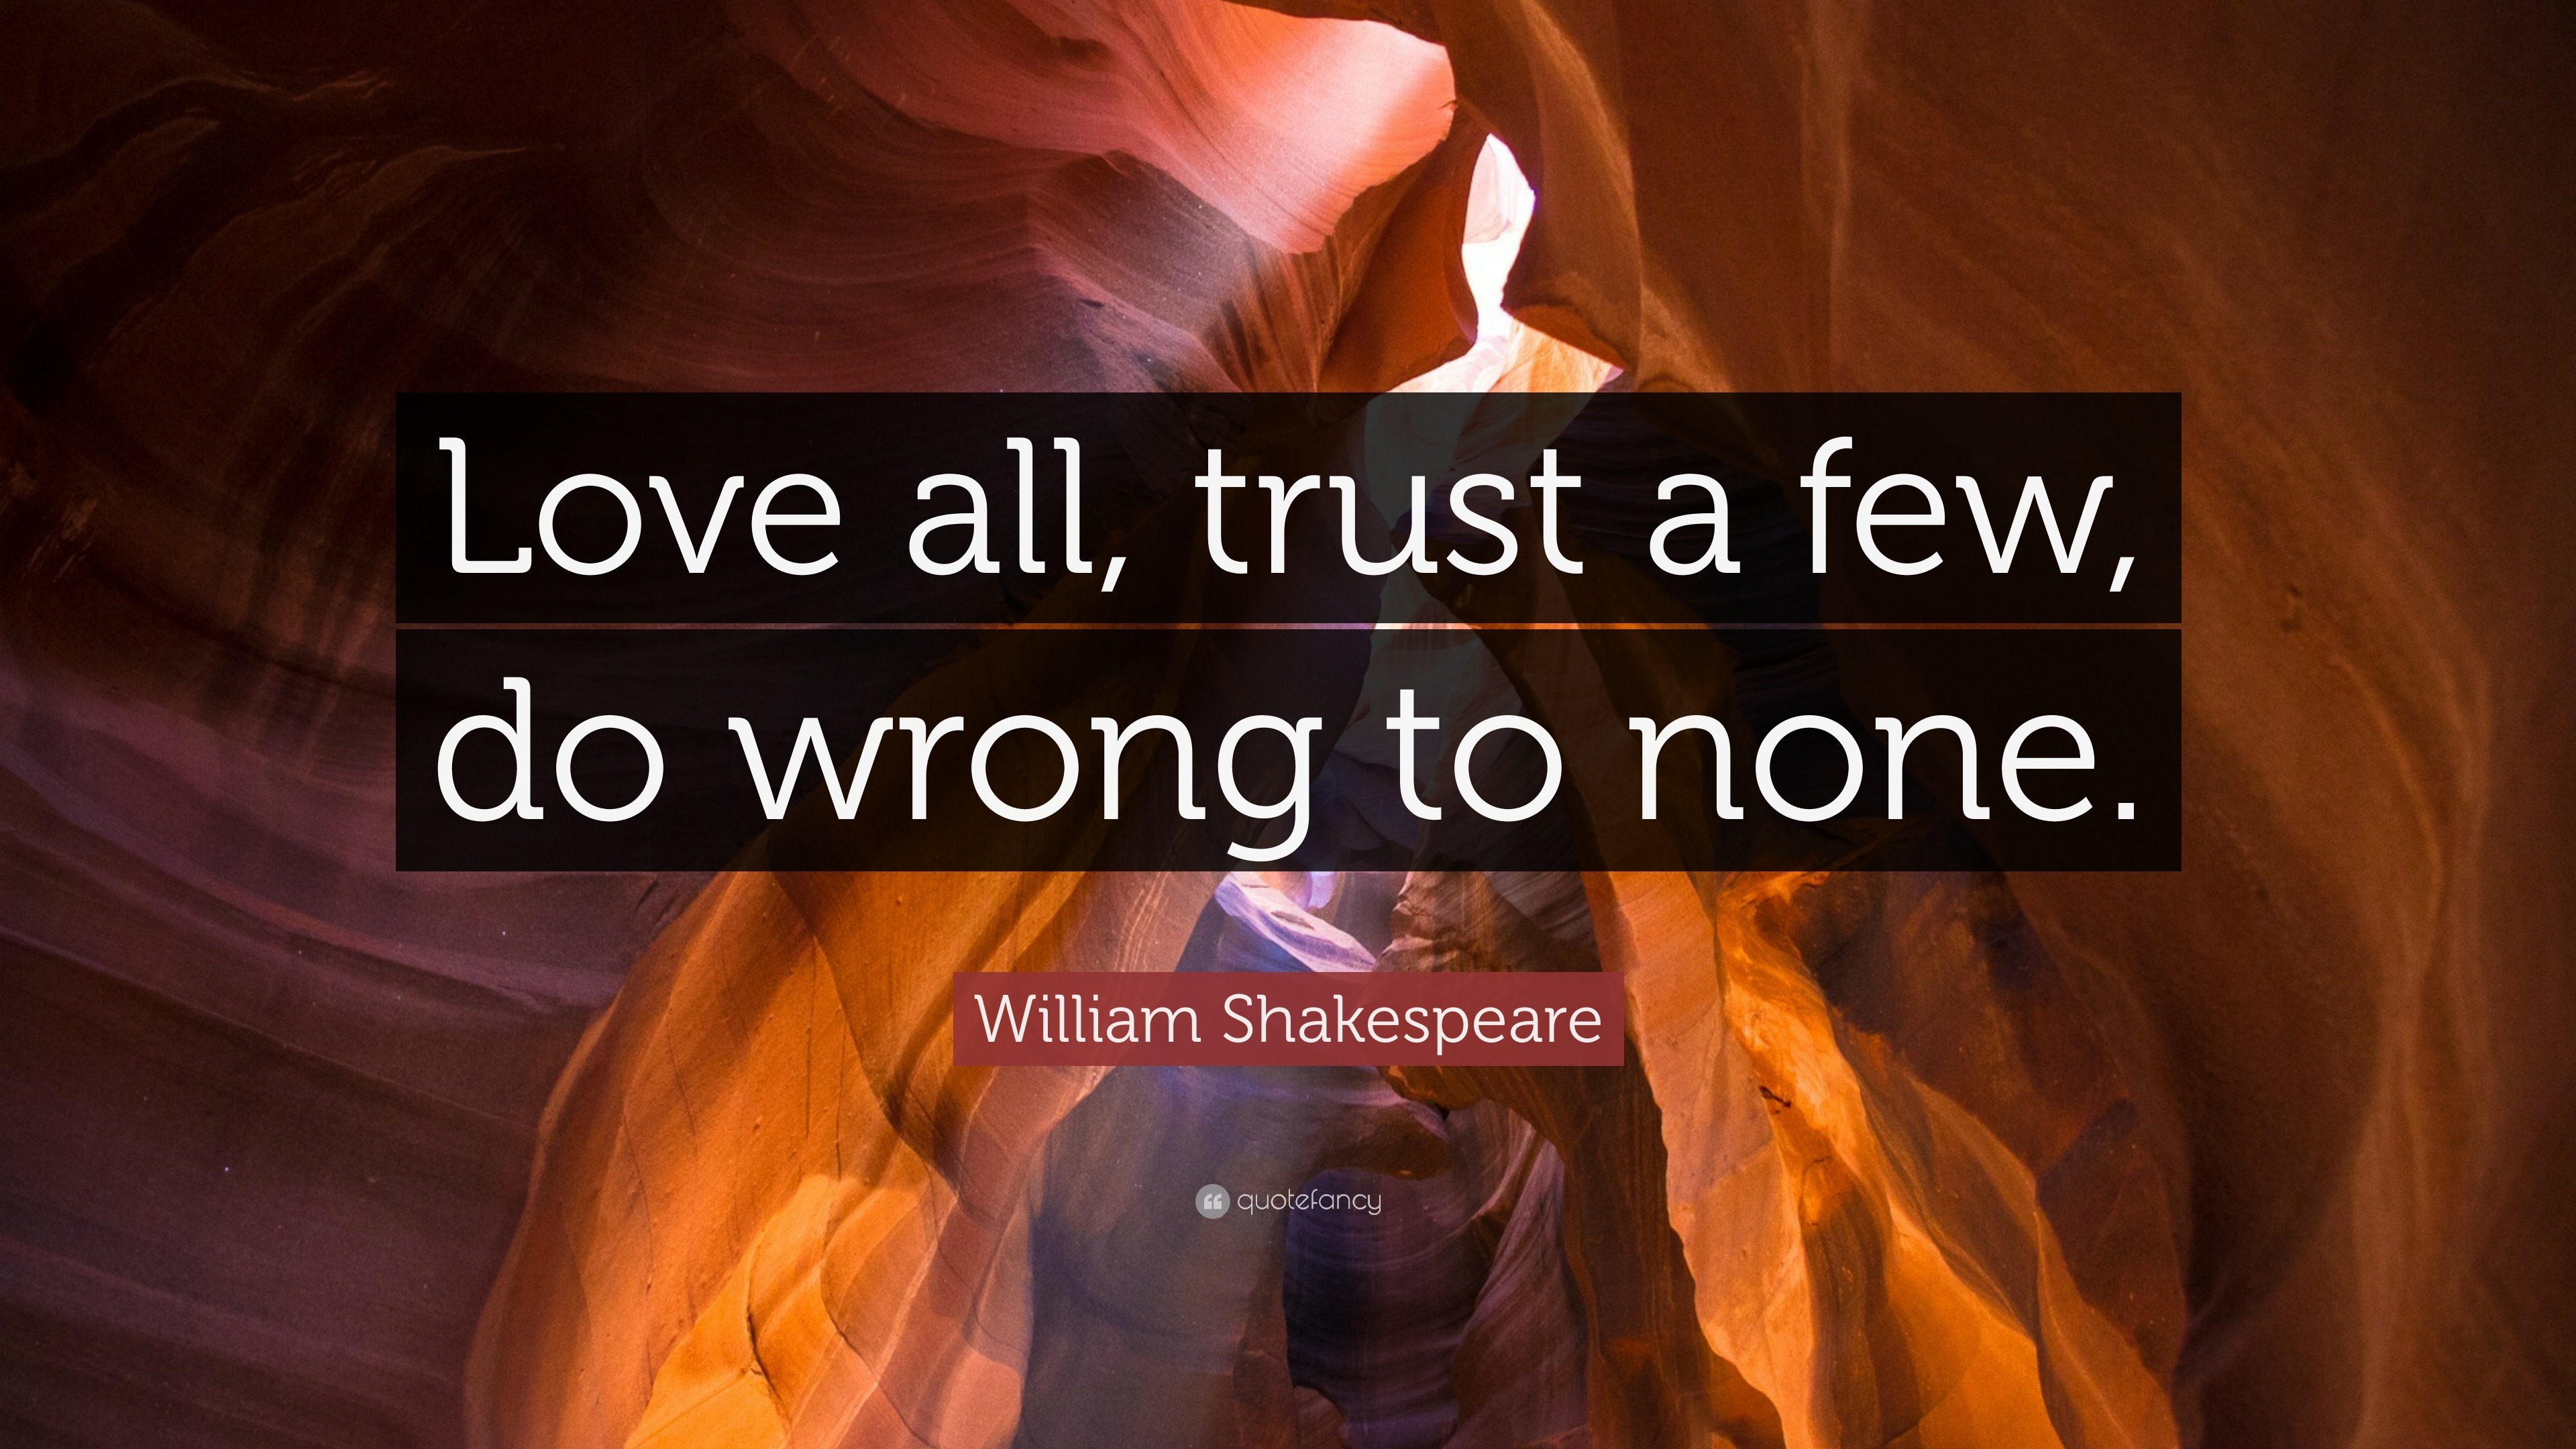 William Shakespeare Quote “Love all trust a few do wrong to none